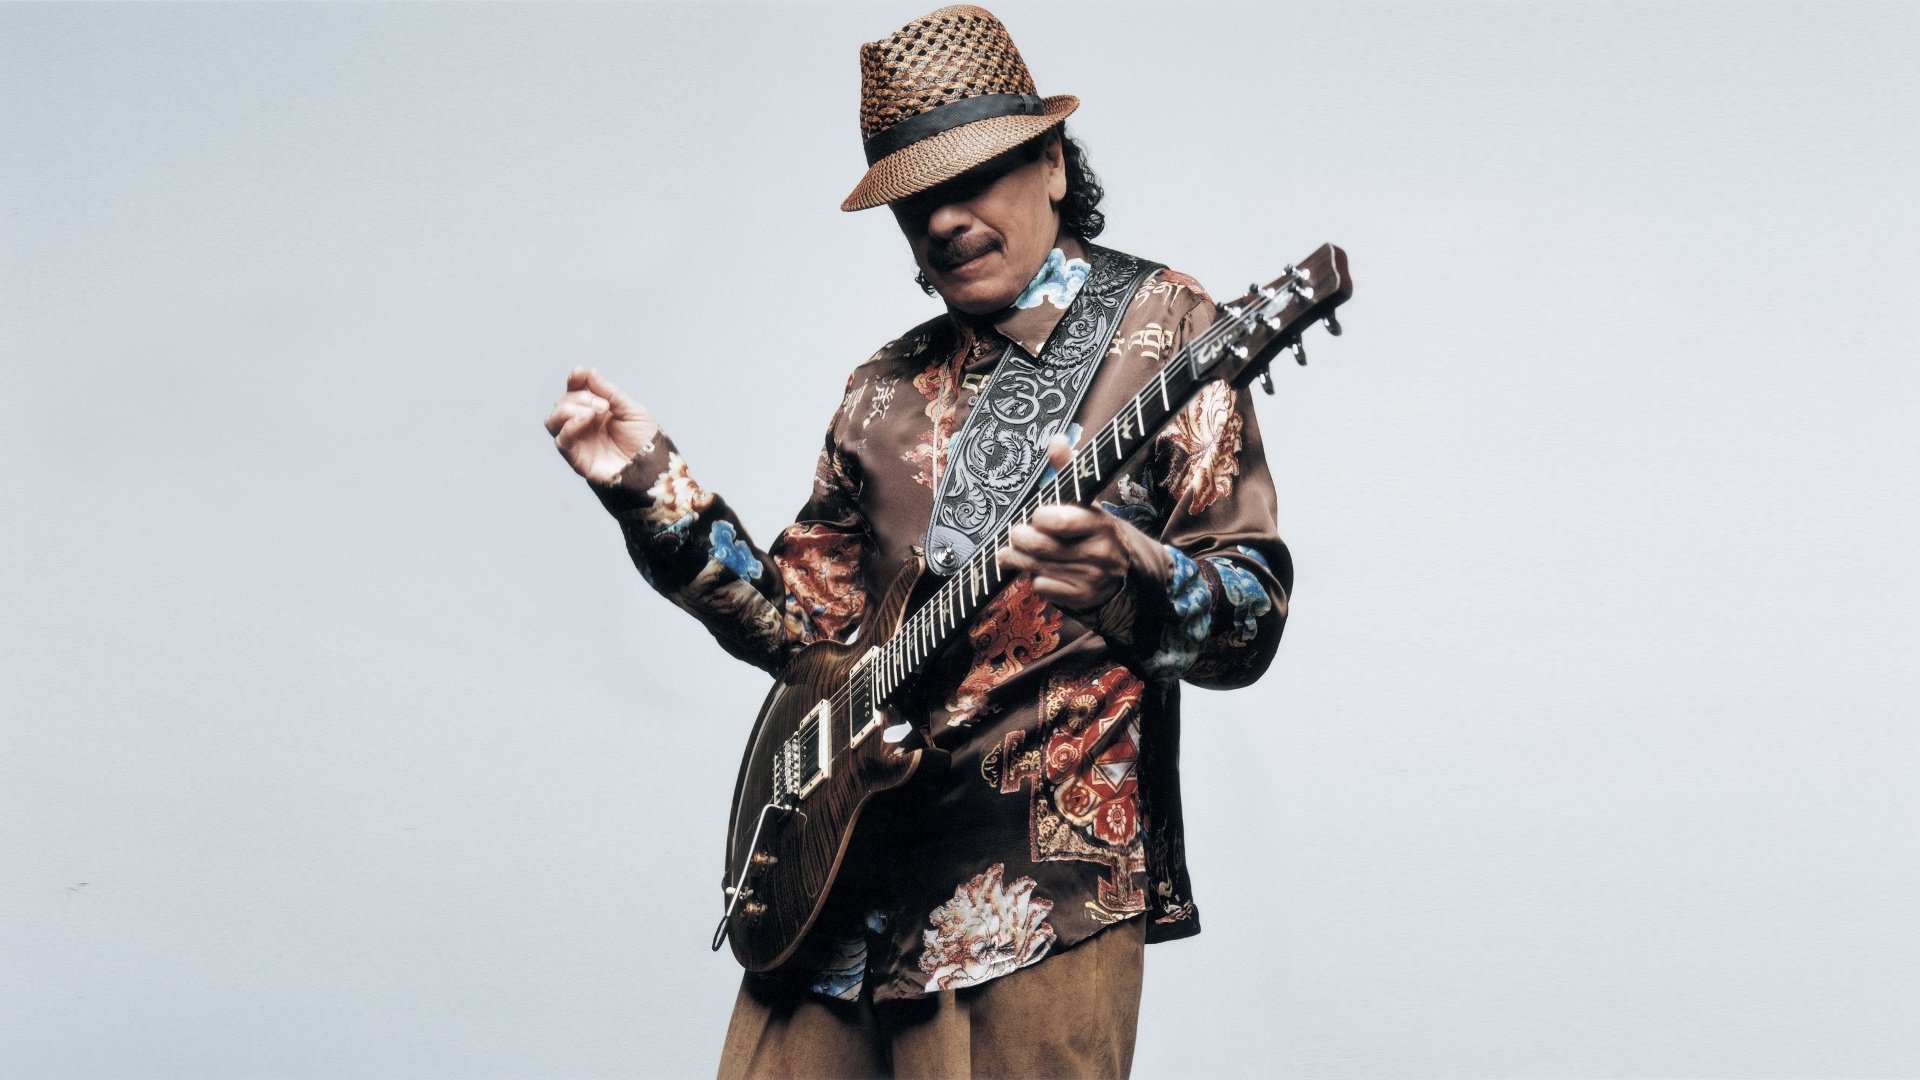 Carlos santana hd papers and backgrounds